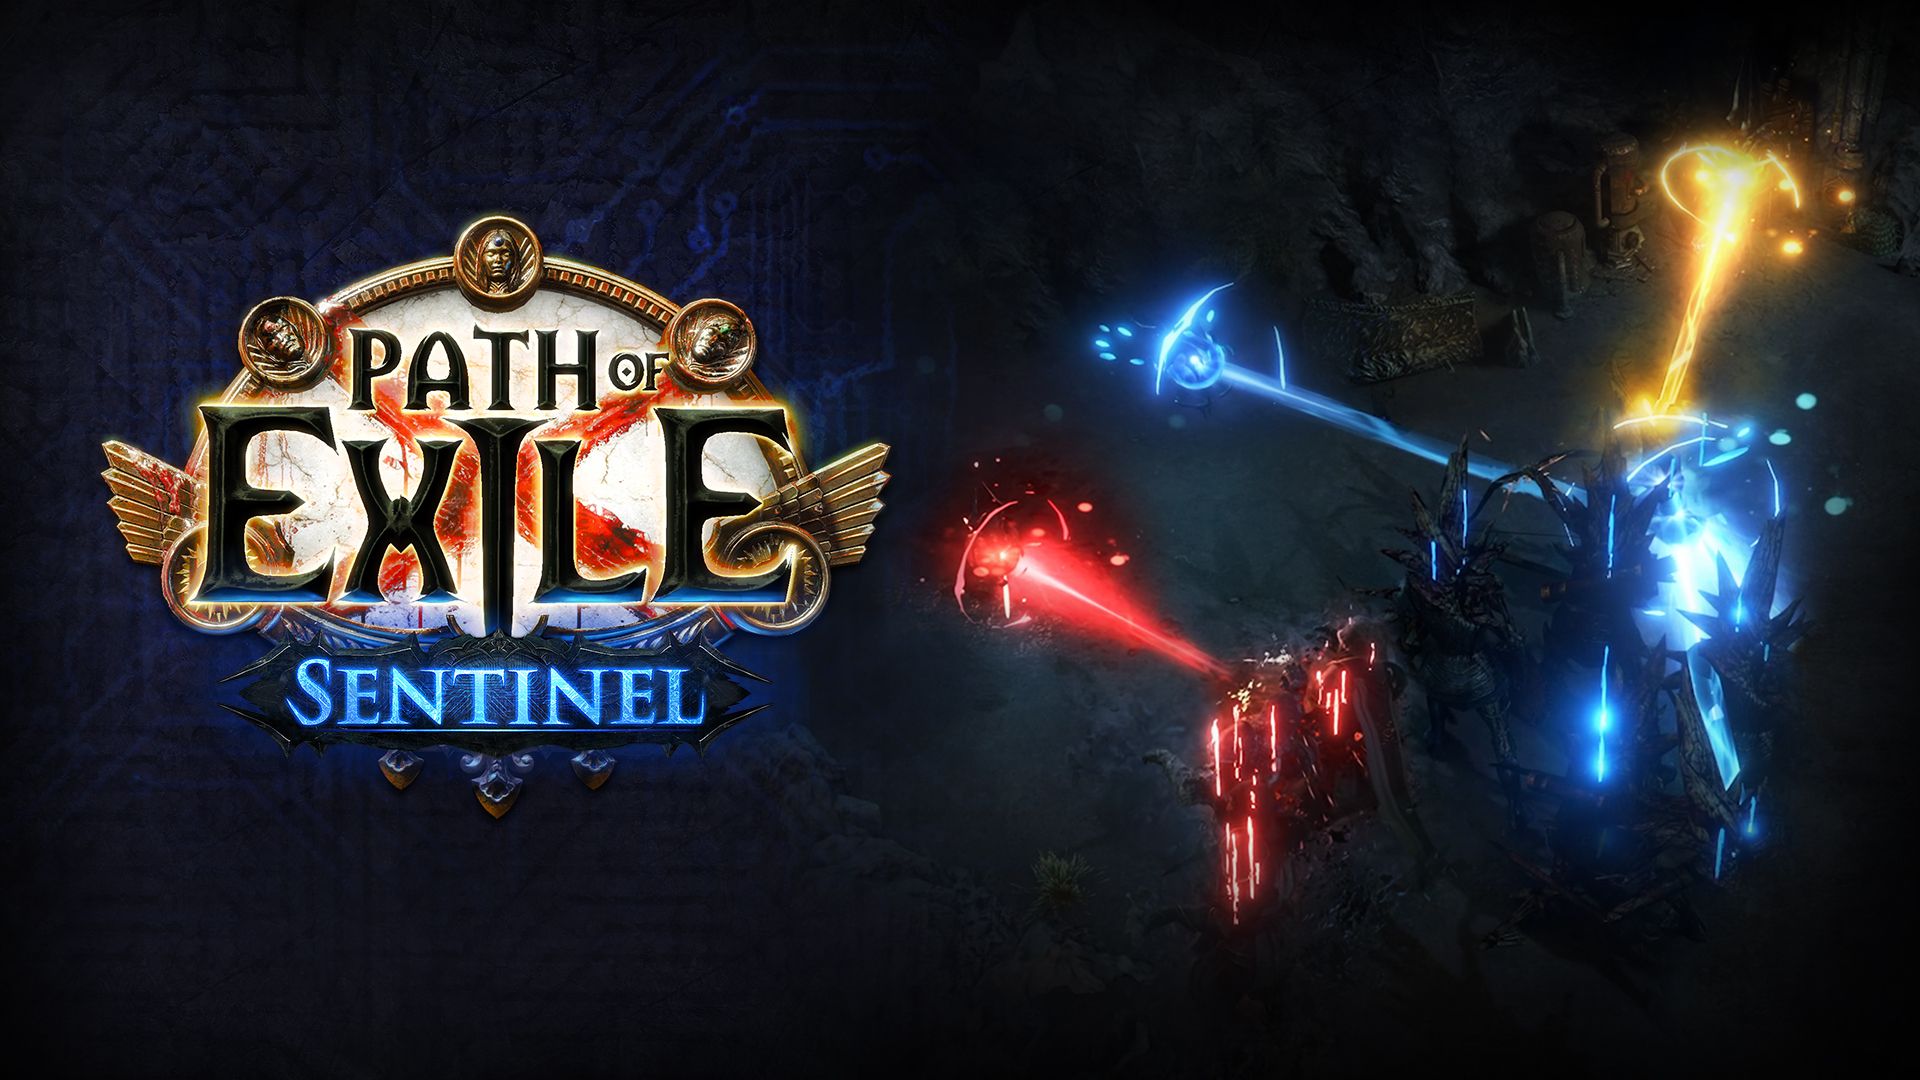 Path of Exile: Sentinel Reveals Release Dates, Trailer & Boatload of Gameplay Additions